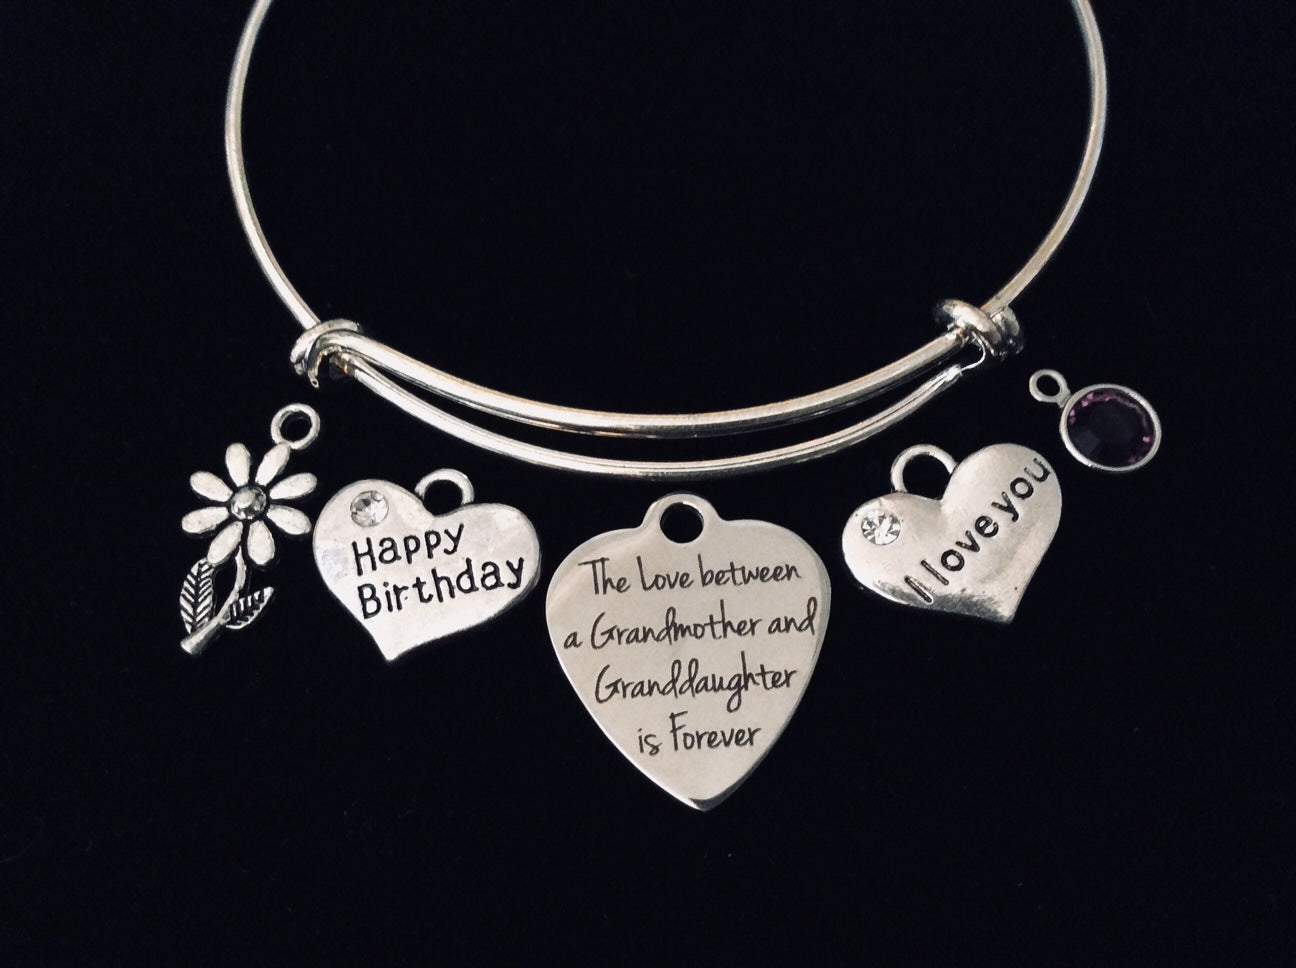 Personalized Happy Birthday Granddaughter Grandmother Expandable